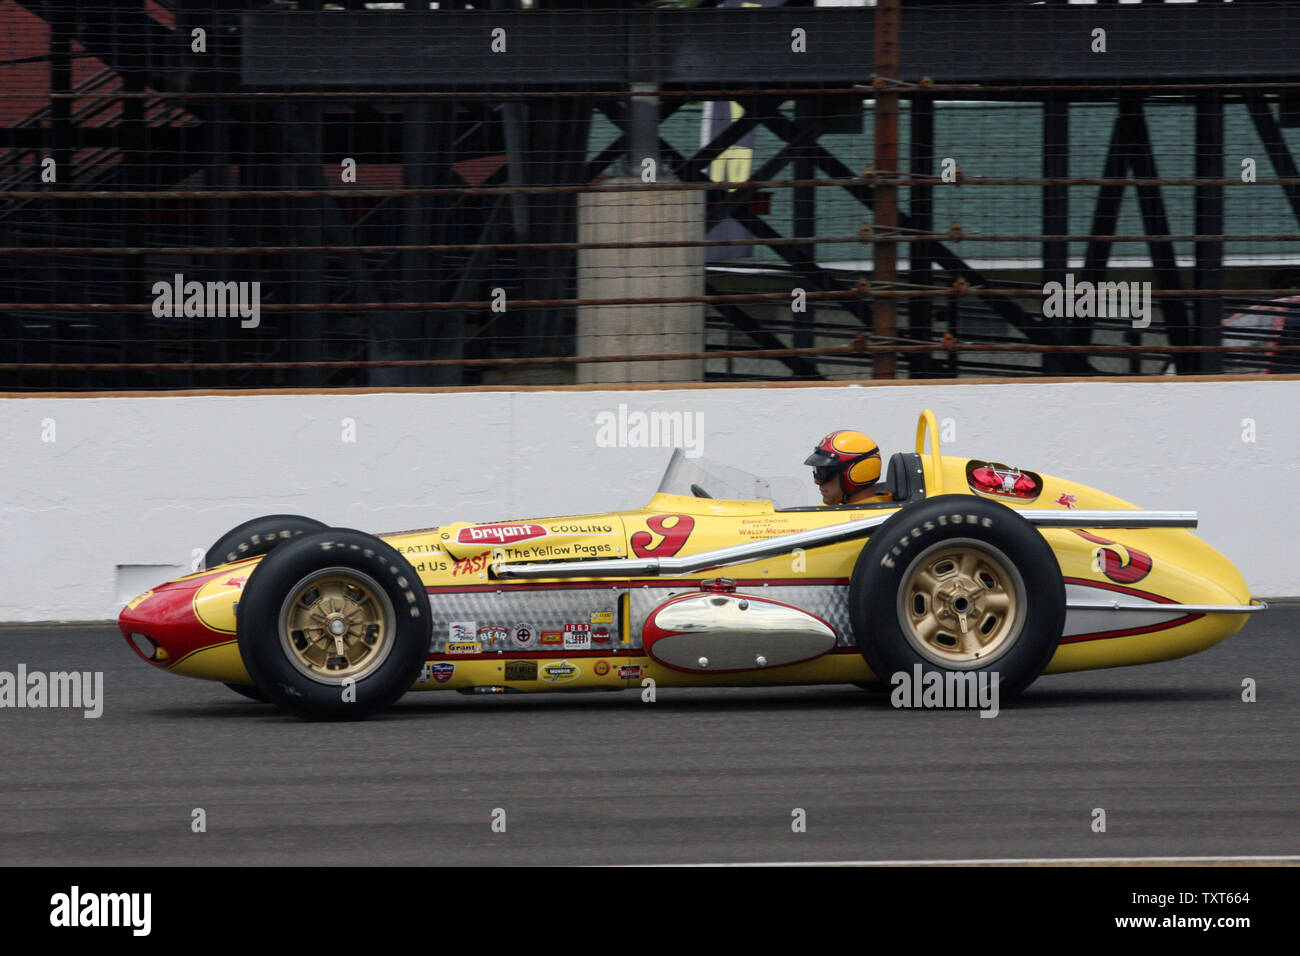 A vintage Watson Indy Roadster that popular driver Eddie Sachs drove in the 1963 Indianapolis 500 takes some laps during a special demonstration for the 99th running of the Indianapolis 500 at the Indianapolis Motor Speedway on May 21, 2015 in Indianapolis, Indiana.    Photo by Bill Coons/UPI Stock Photo